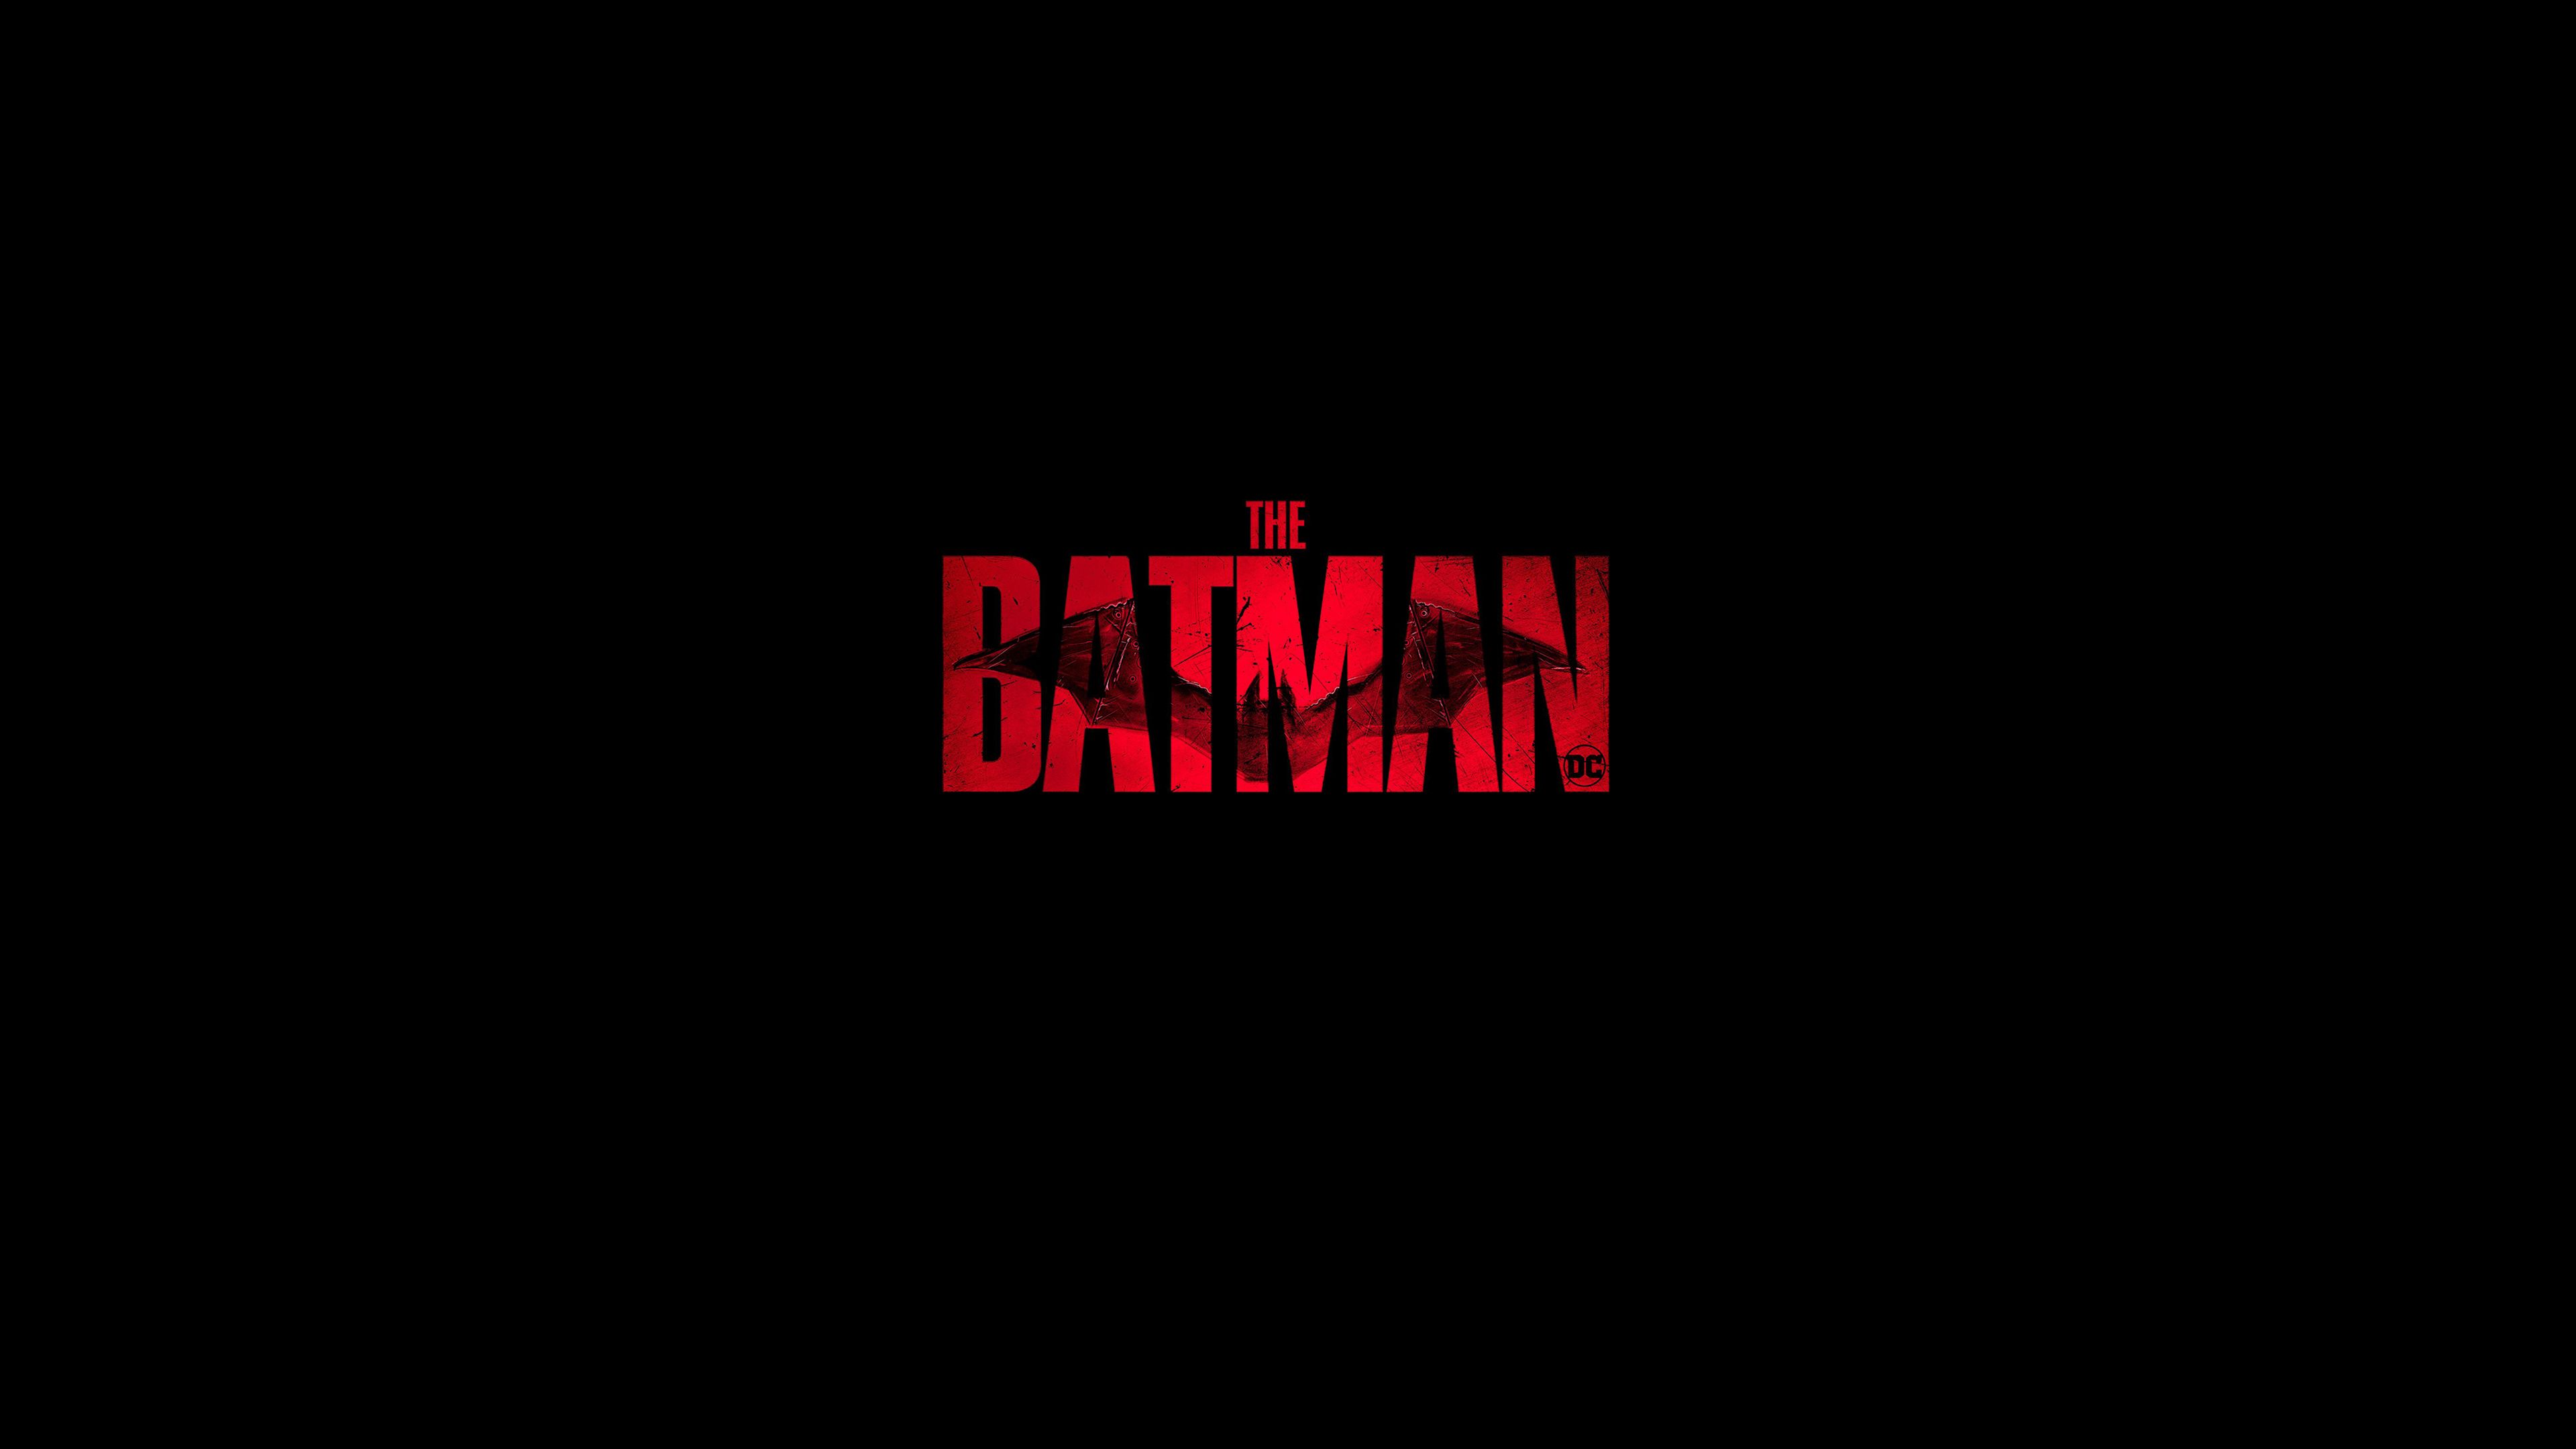 The Batman 2021 Logo Wallpaper, HD Movies 4K Wallpapers, Image, Photos and Backgrounds